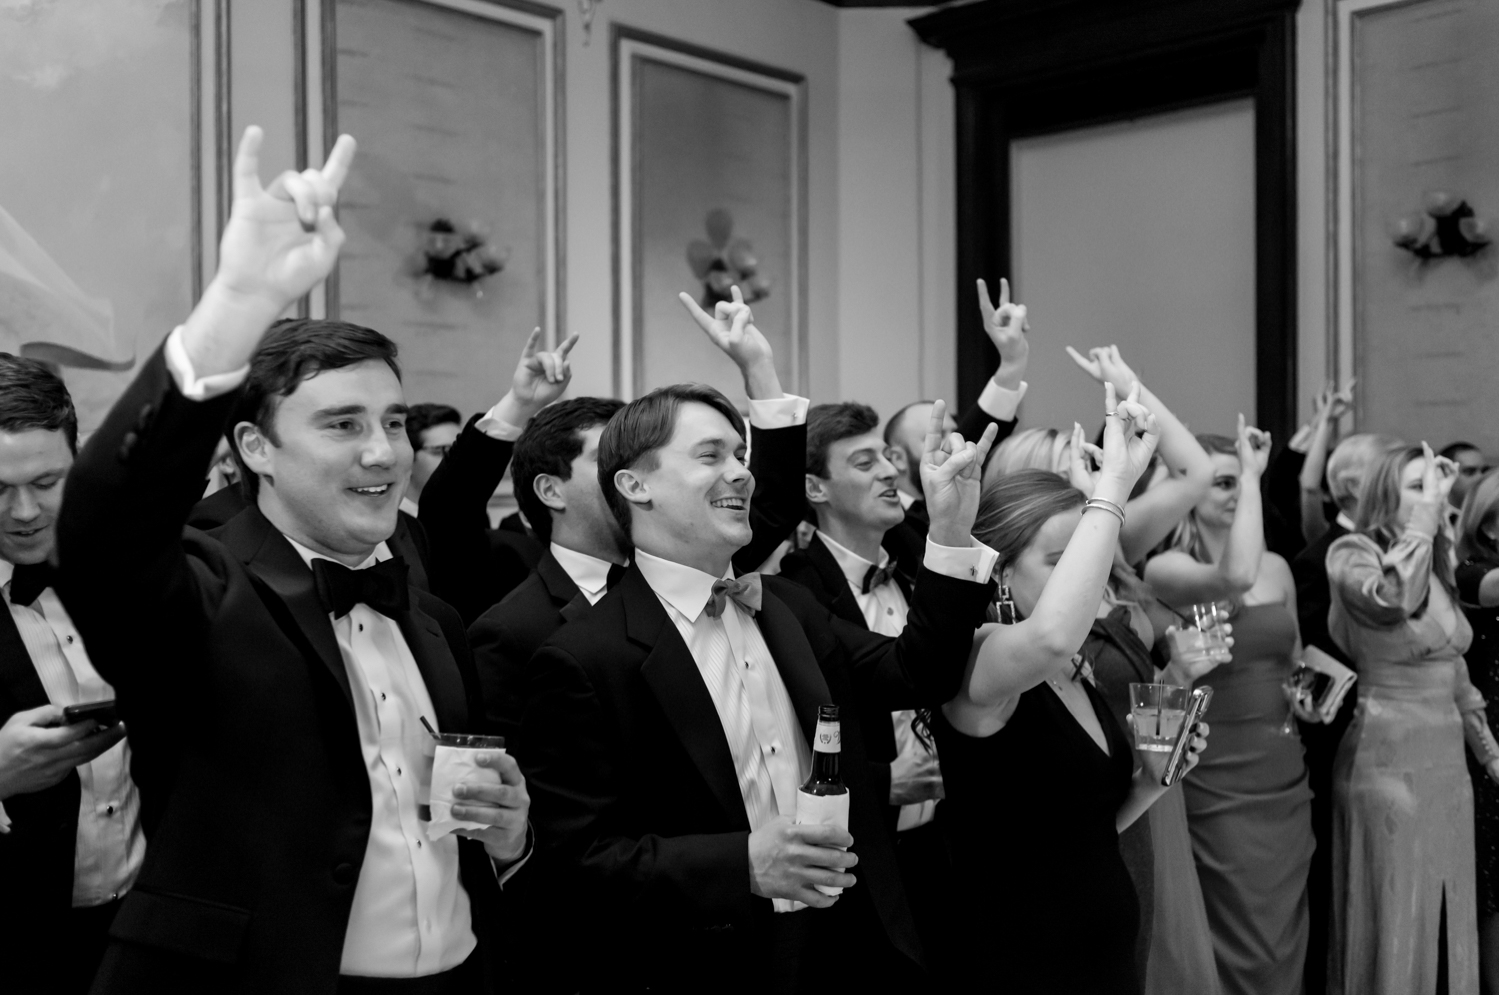 The crowd watches the bride dance with her father as they all hold up the "hook em" hand sign from The University of Texas at Austin.